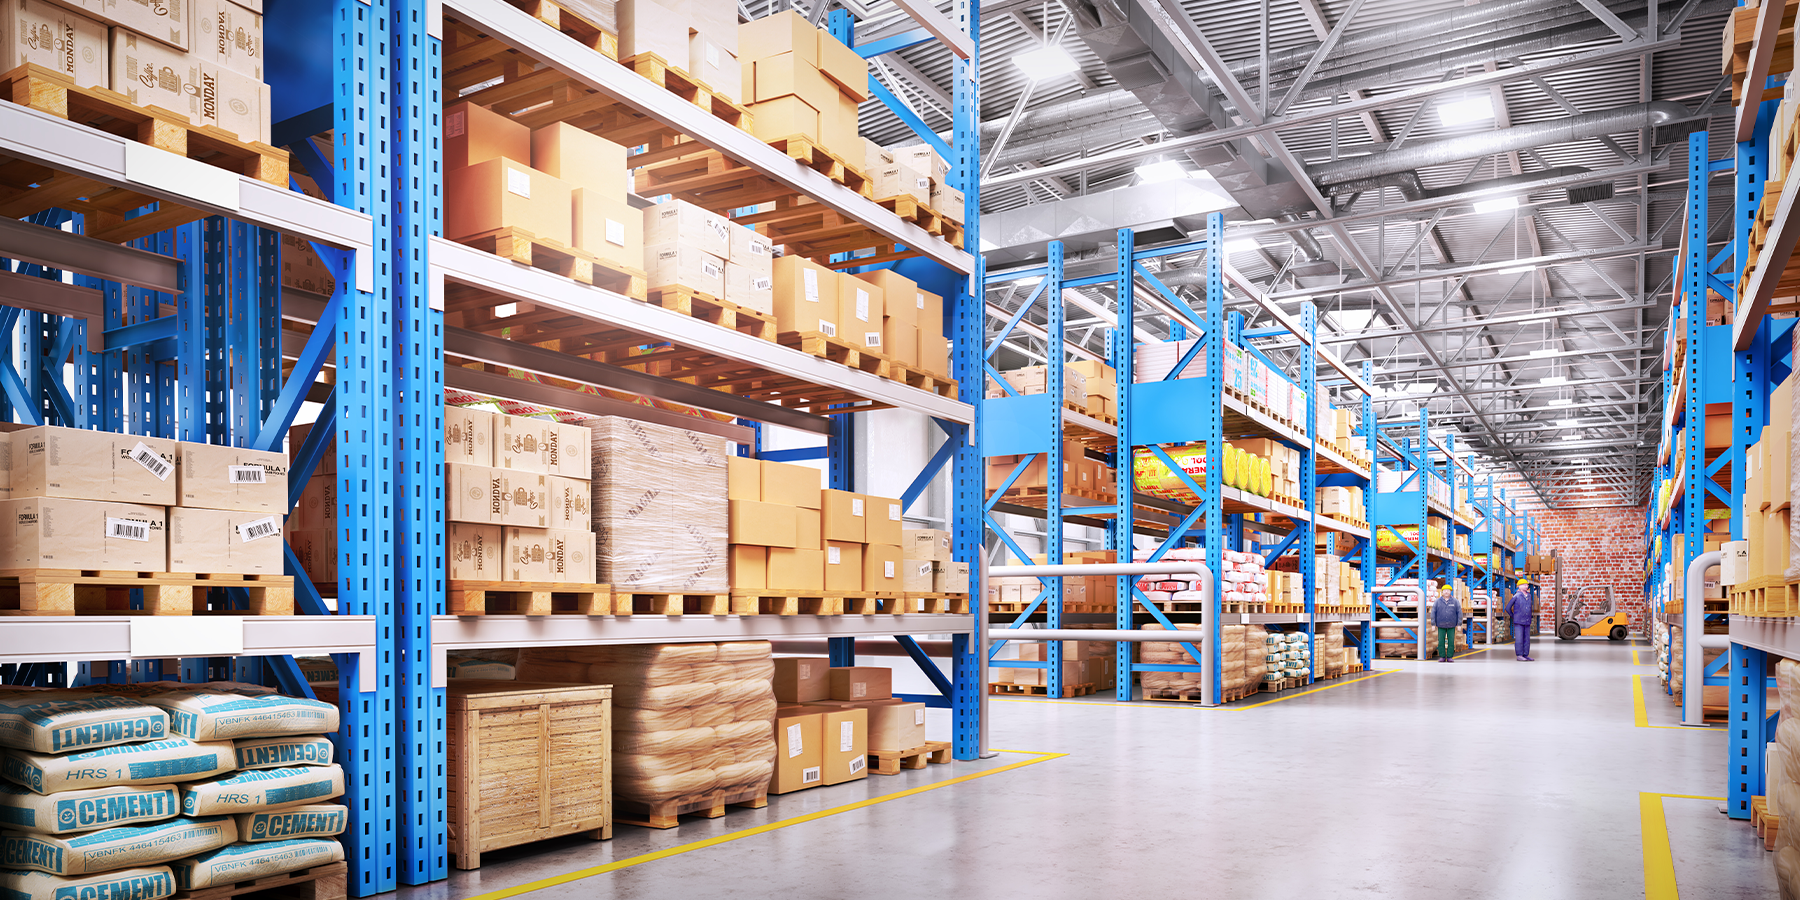 Finding Warehouse Funding in 2023